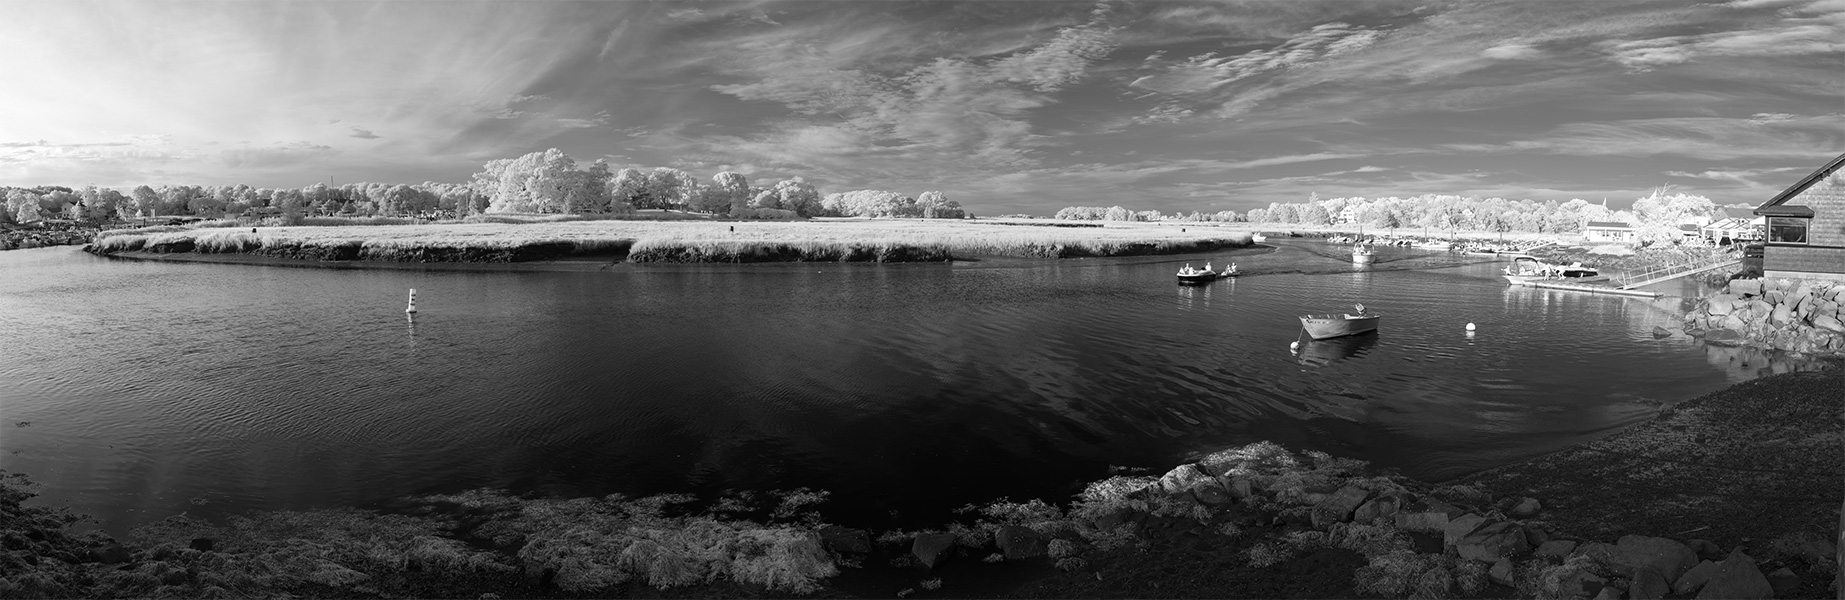 Infrared Panoramic Photo of a River Bend, with Boats in the Water and Marinas to Left and Right.